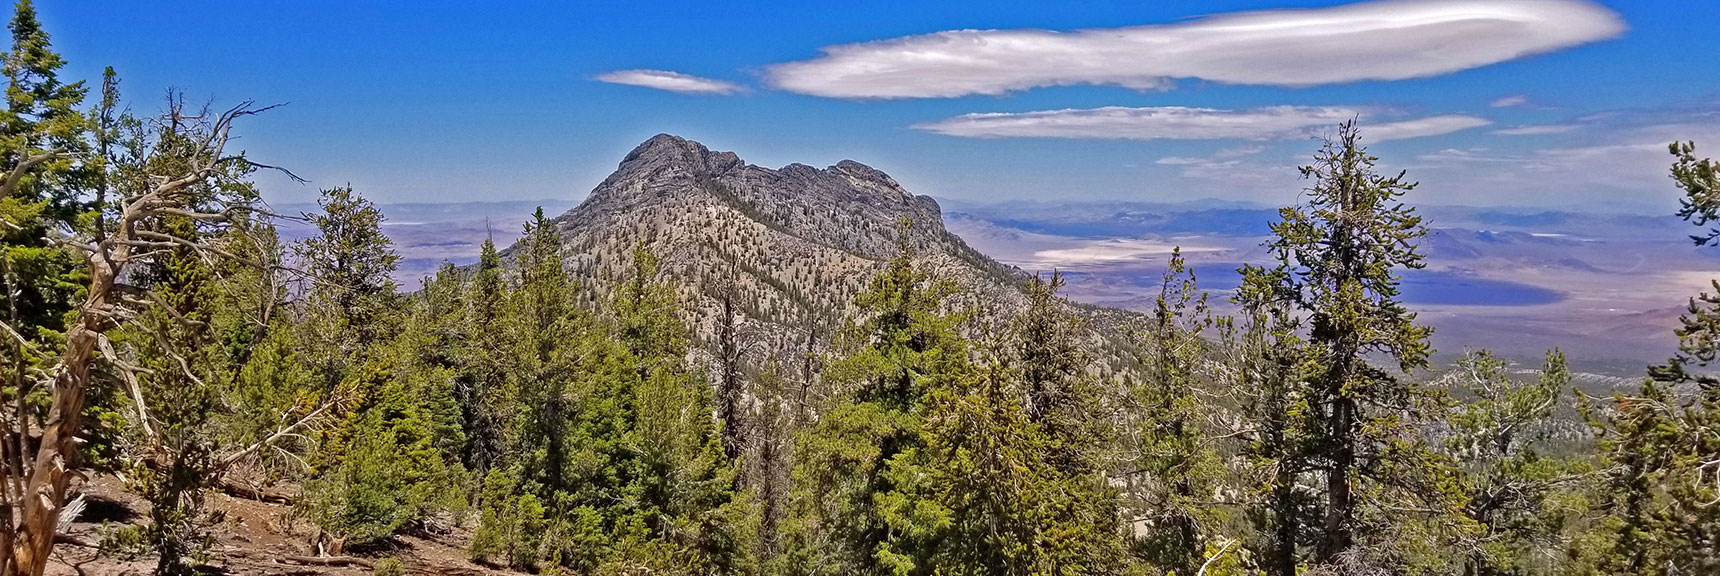 Macks Peak Viewed During Descent from The Sisters South | The Sisters South | Lee Canyon | Mt Charleston Wilderness | Spring Mountains, Nevada